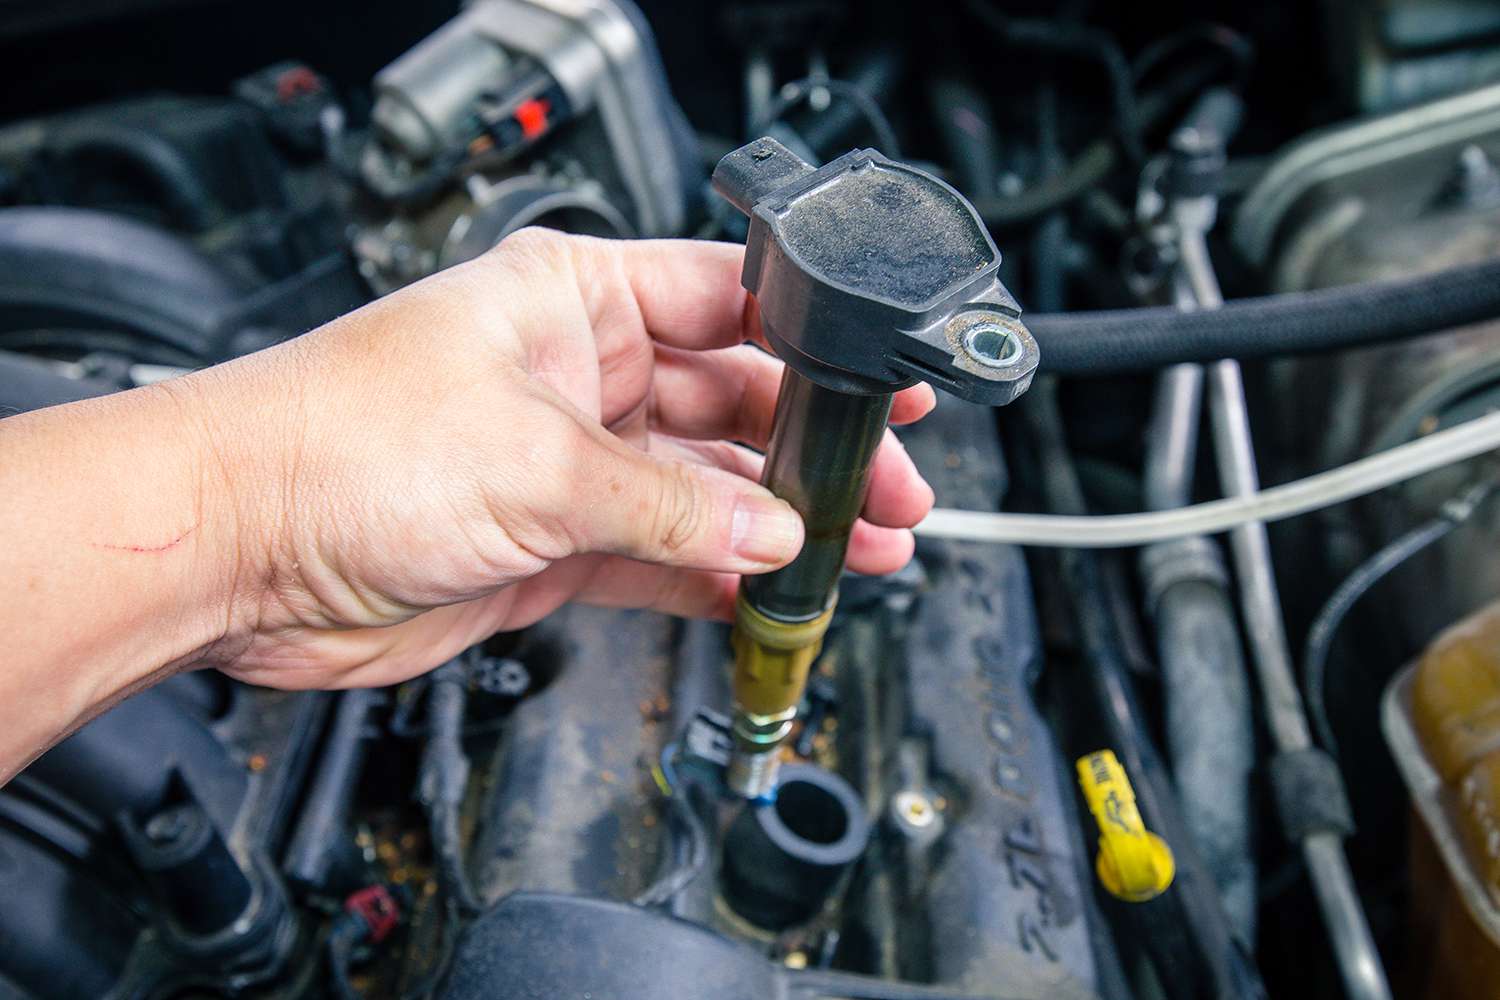 How To Test Ignition Coils With Basic Hand Tools